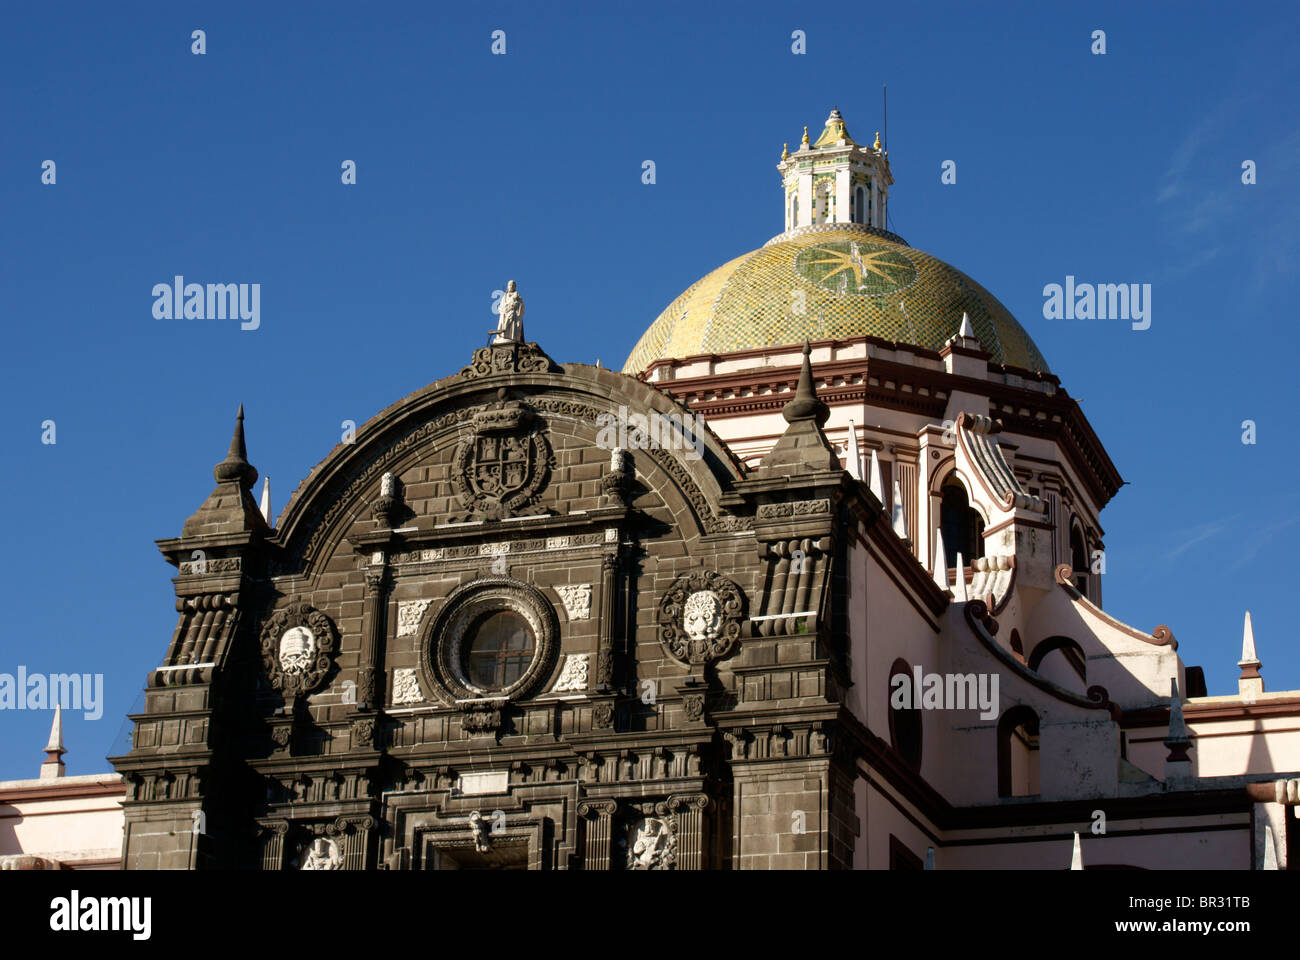 Talavera tiled dome of the Cathedral of the Immaculate Conception in the city of Puebla, Mexico Stock Photo